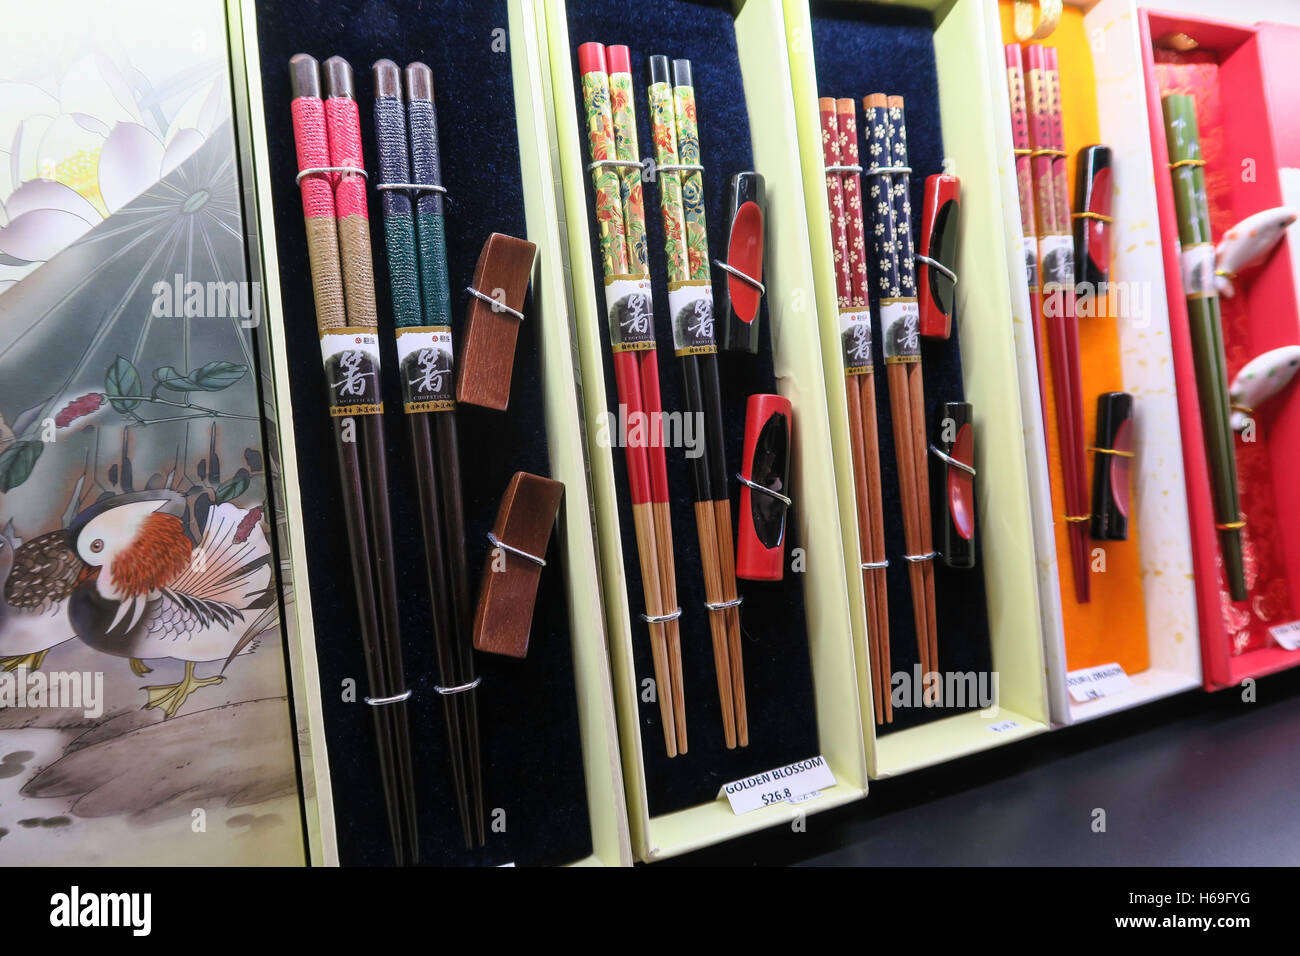 Expensive High-End Chopstick Sets For Sale, Yunhong Retail Shop, Chinatown, NYC, USA Stock Photo